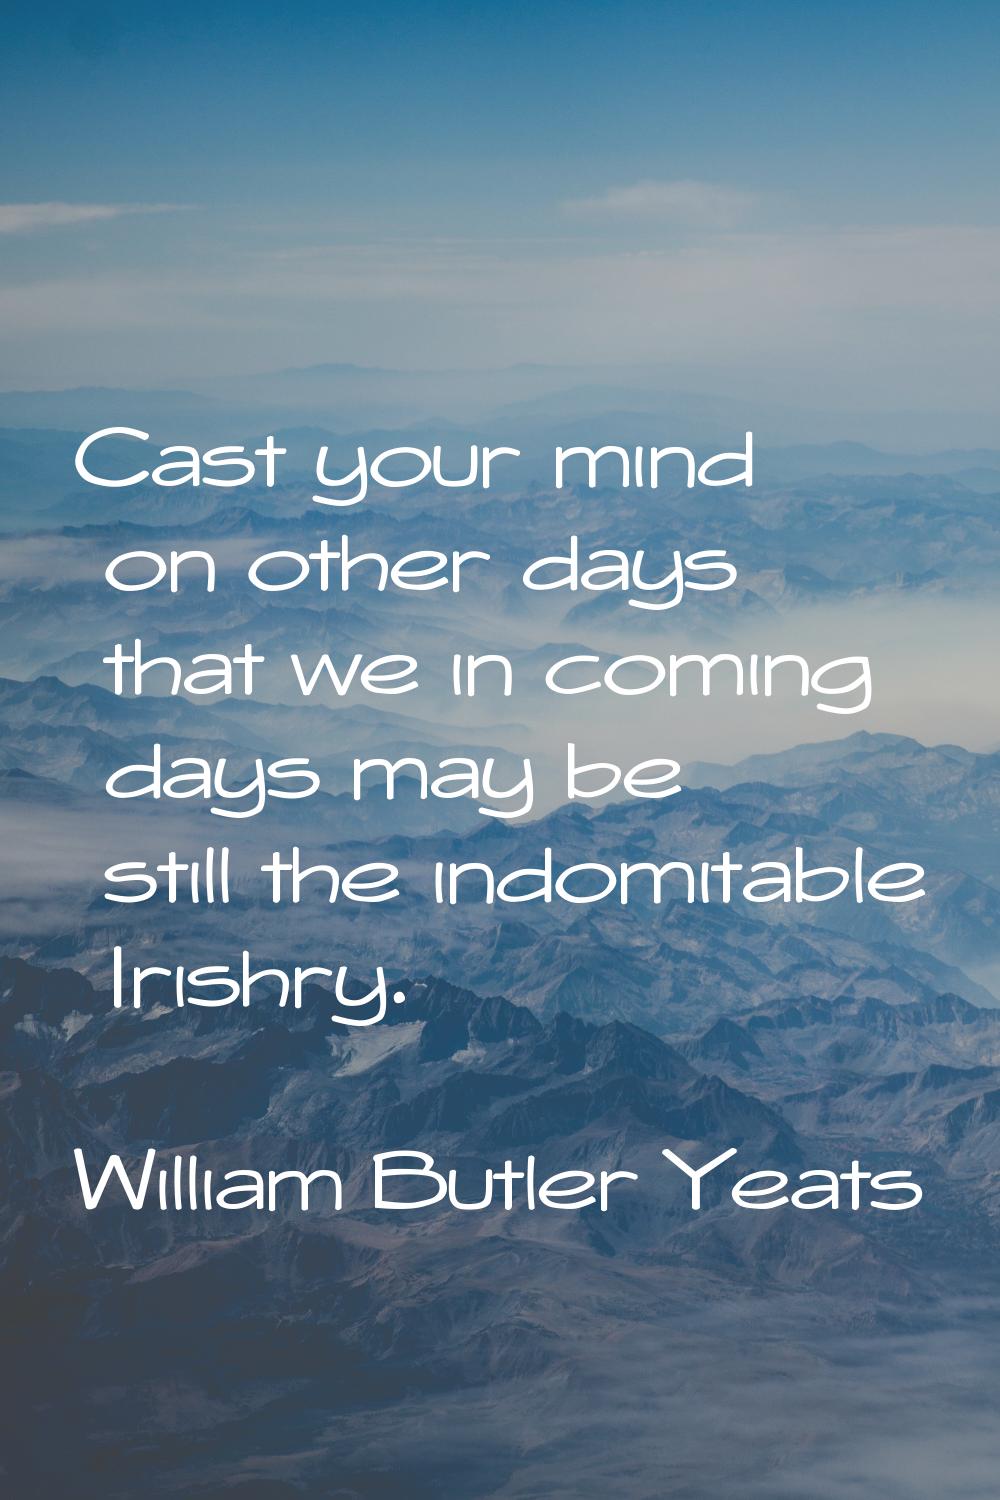 Cast your mind on other days that we in coming days may be still the indomitable Irishry.